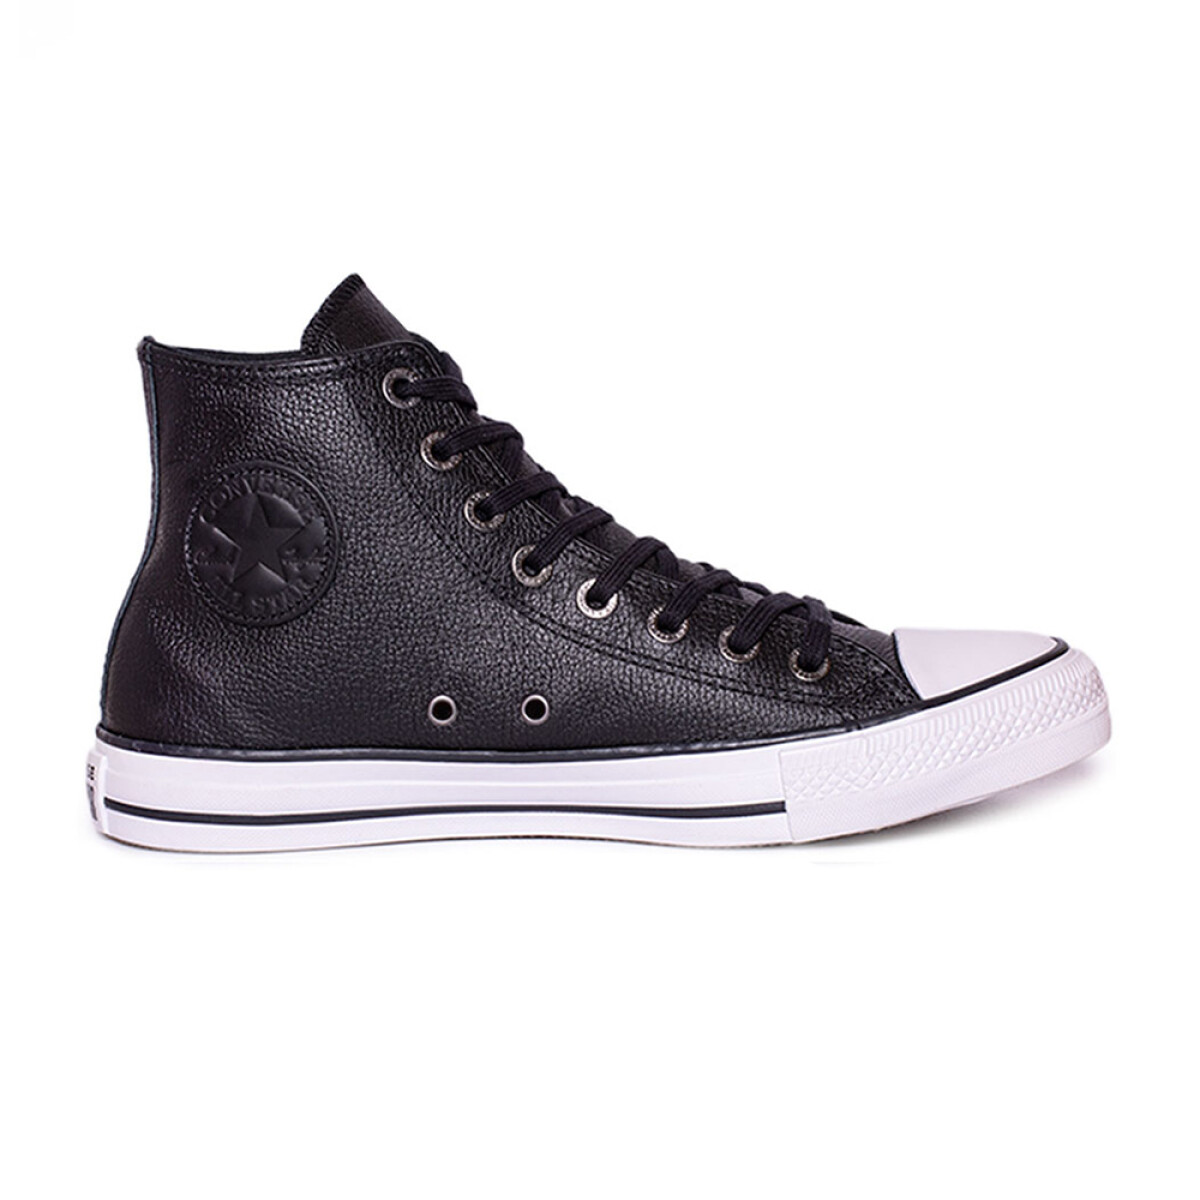 CHUCK TAYLOR AS HI LEATHER - CONVERSE 